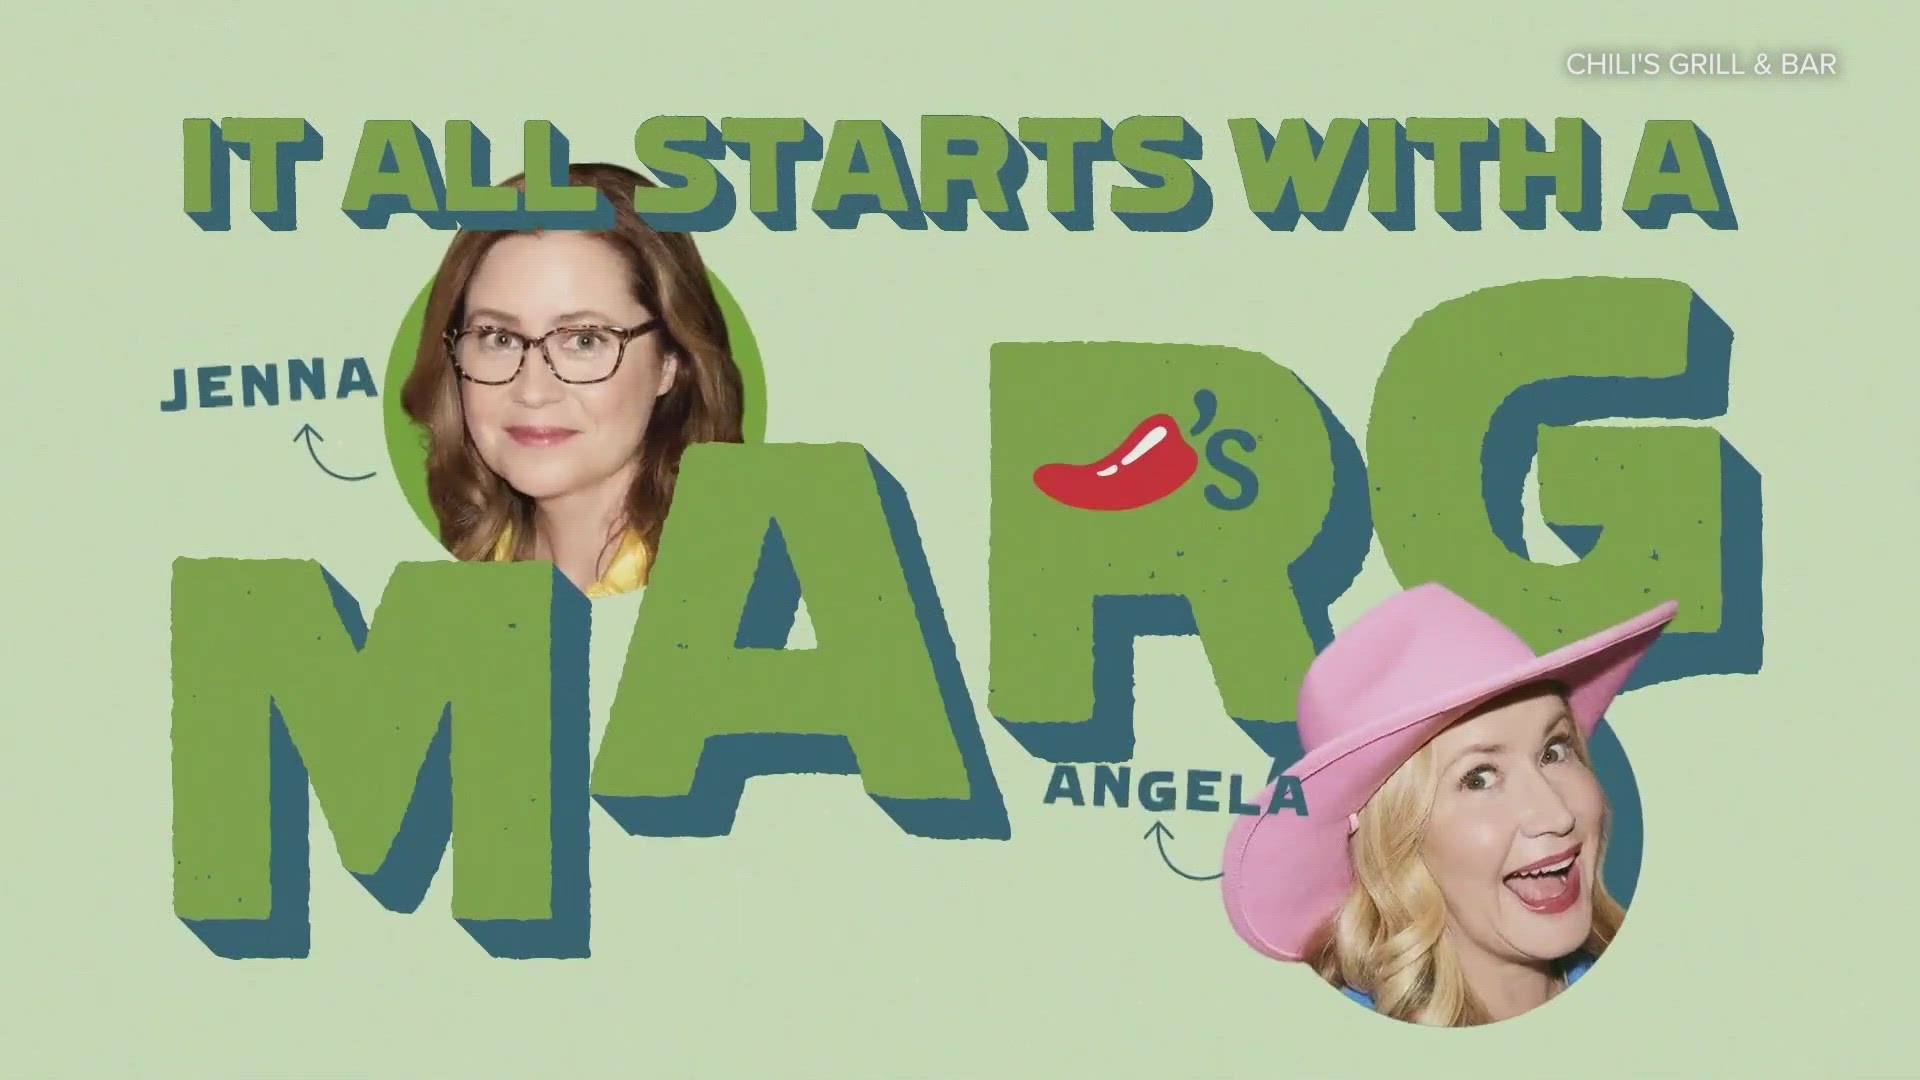 "The Office" co-stars Jenna Fischer and Angela Kinsey are raising a glass in Chili's Grill & Bar's "It All Starts with a Marg" campaign.